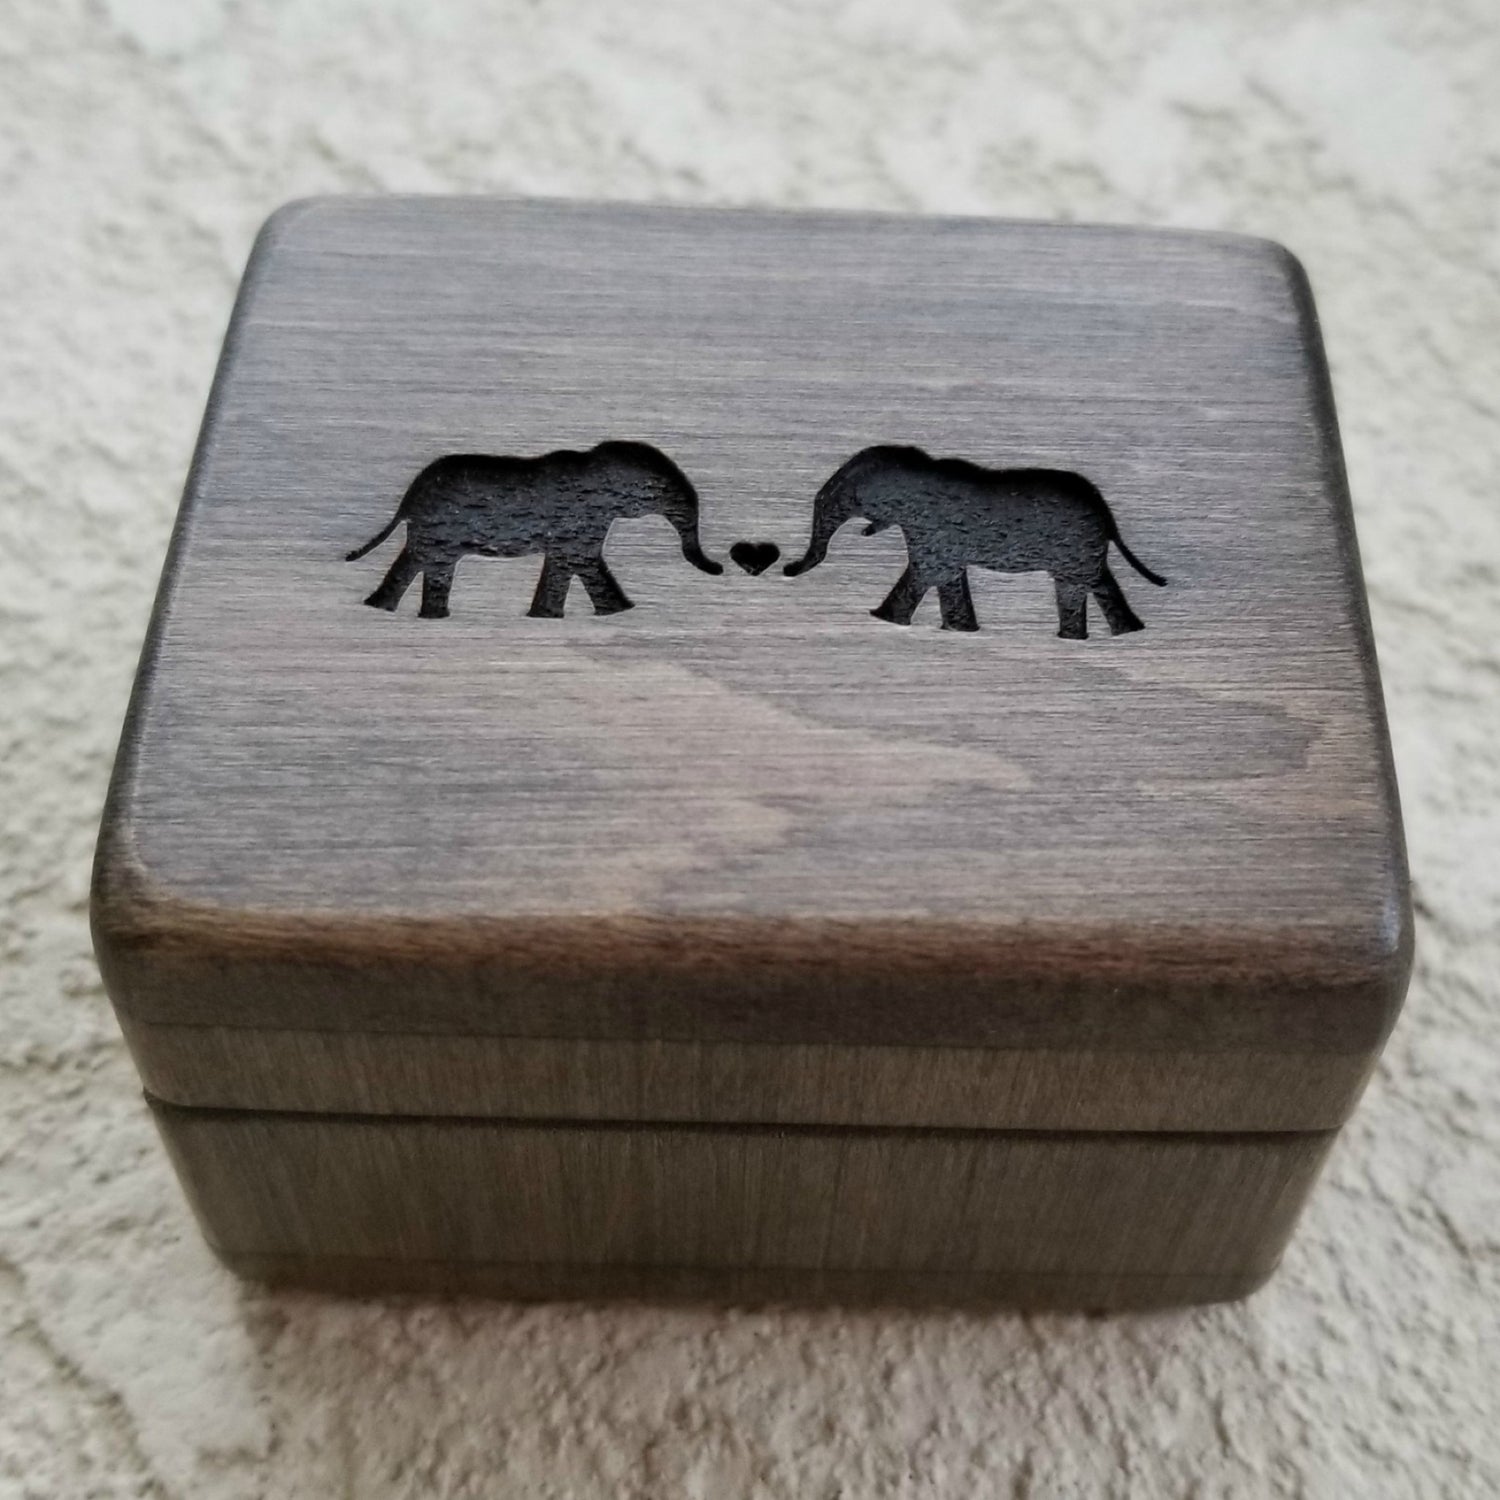 elephant ring box, engagement box with elephants engraved on top